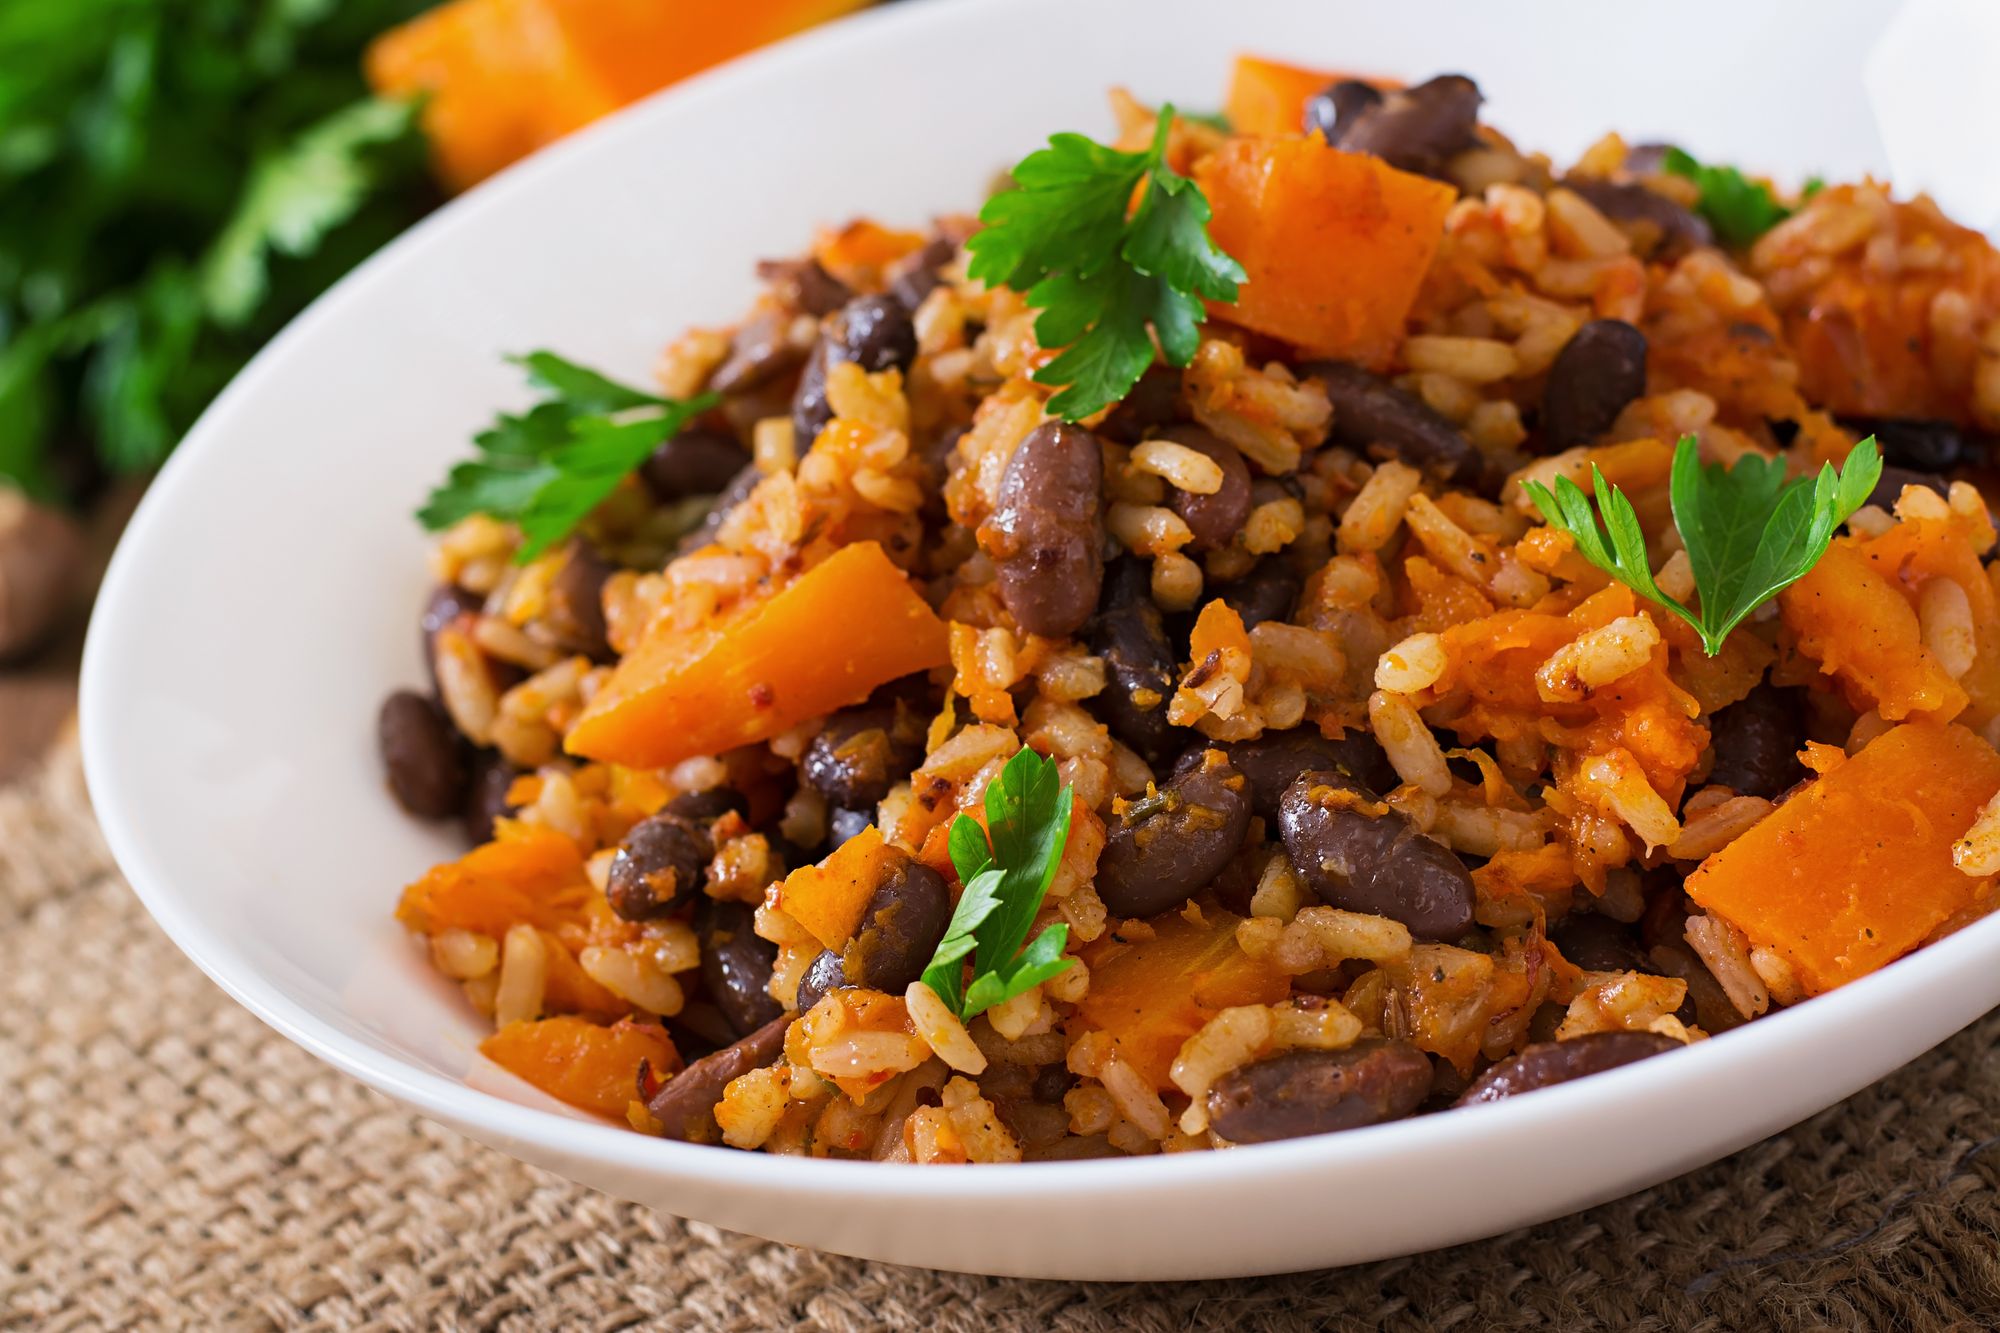 Easy Spanish Rice and Beans